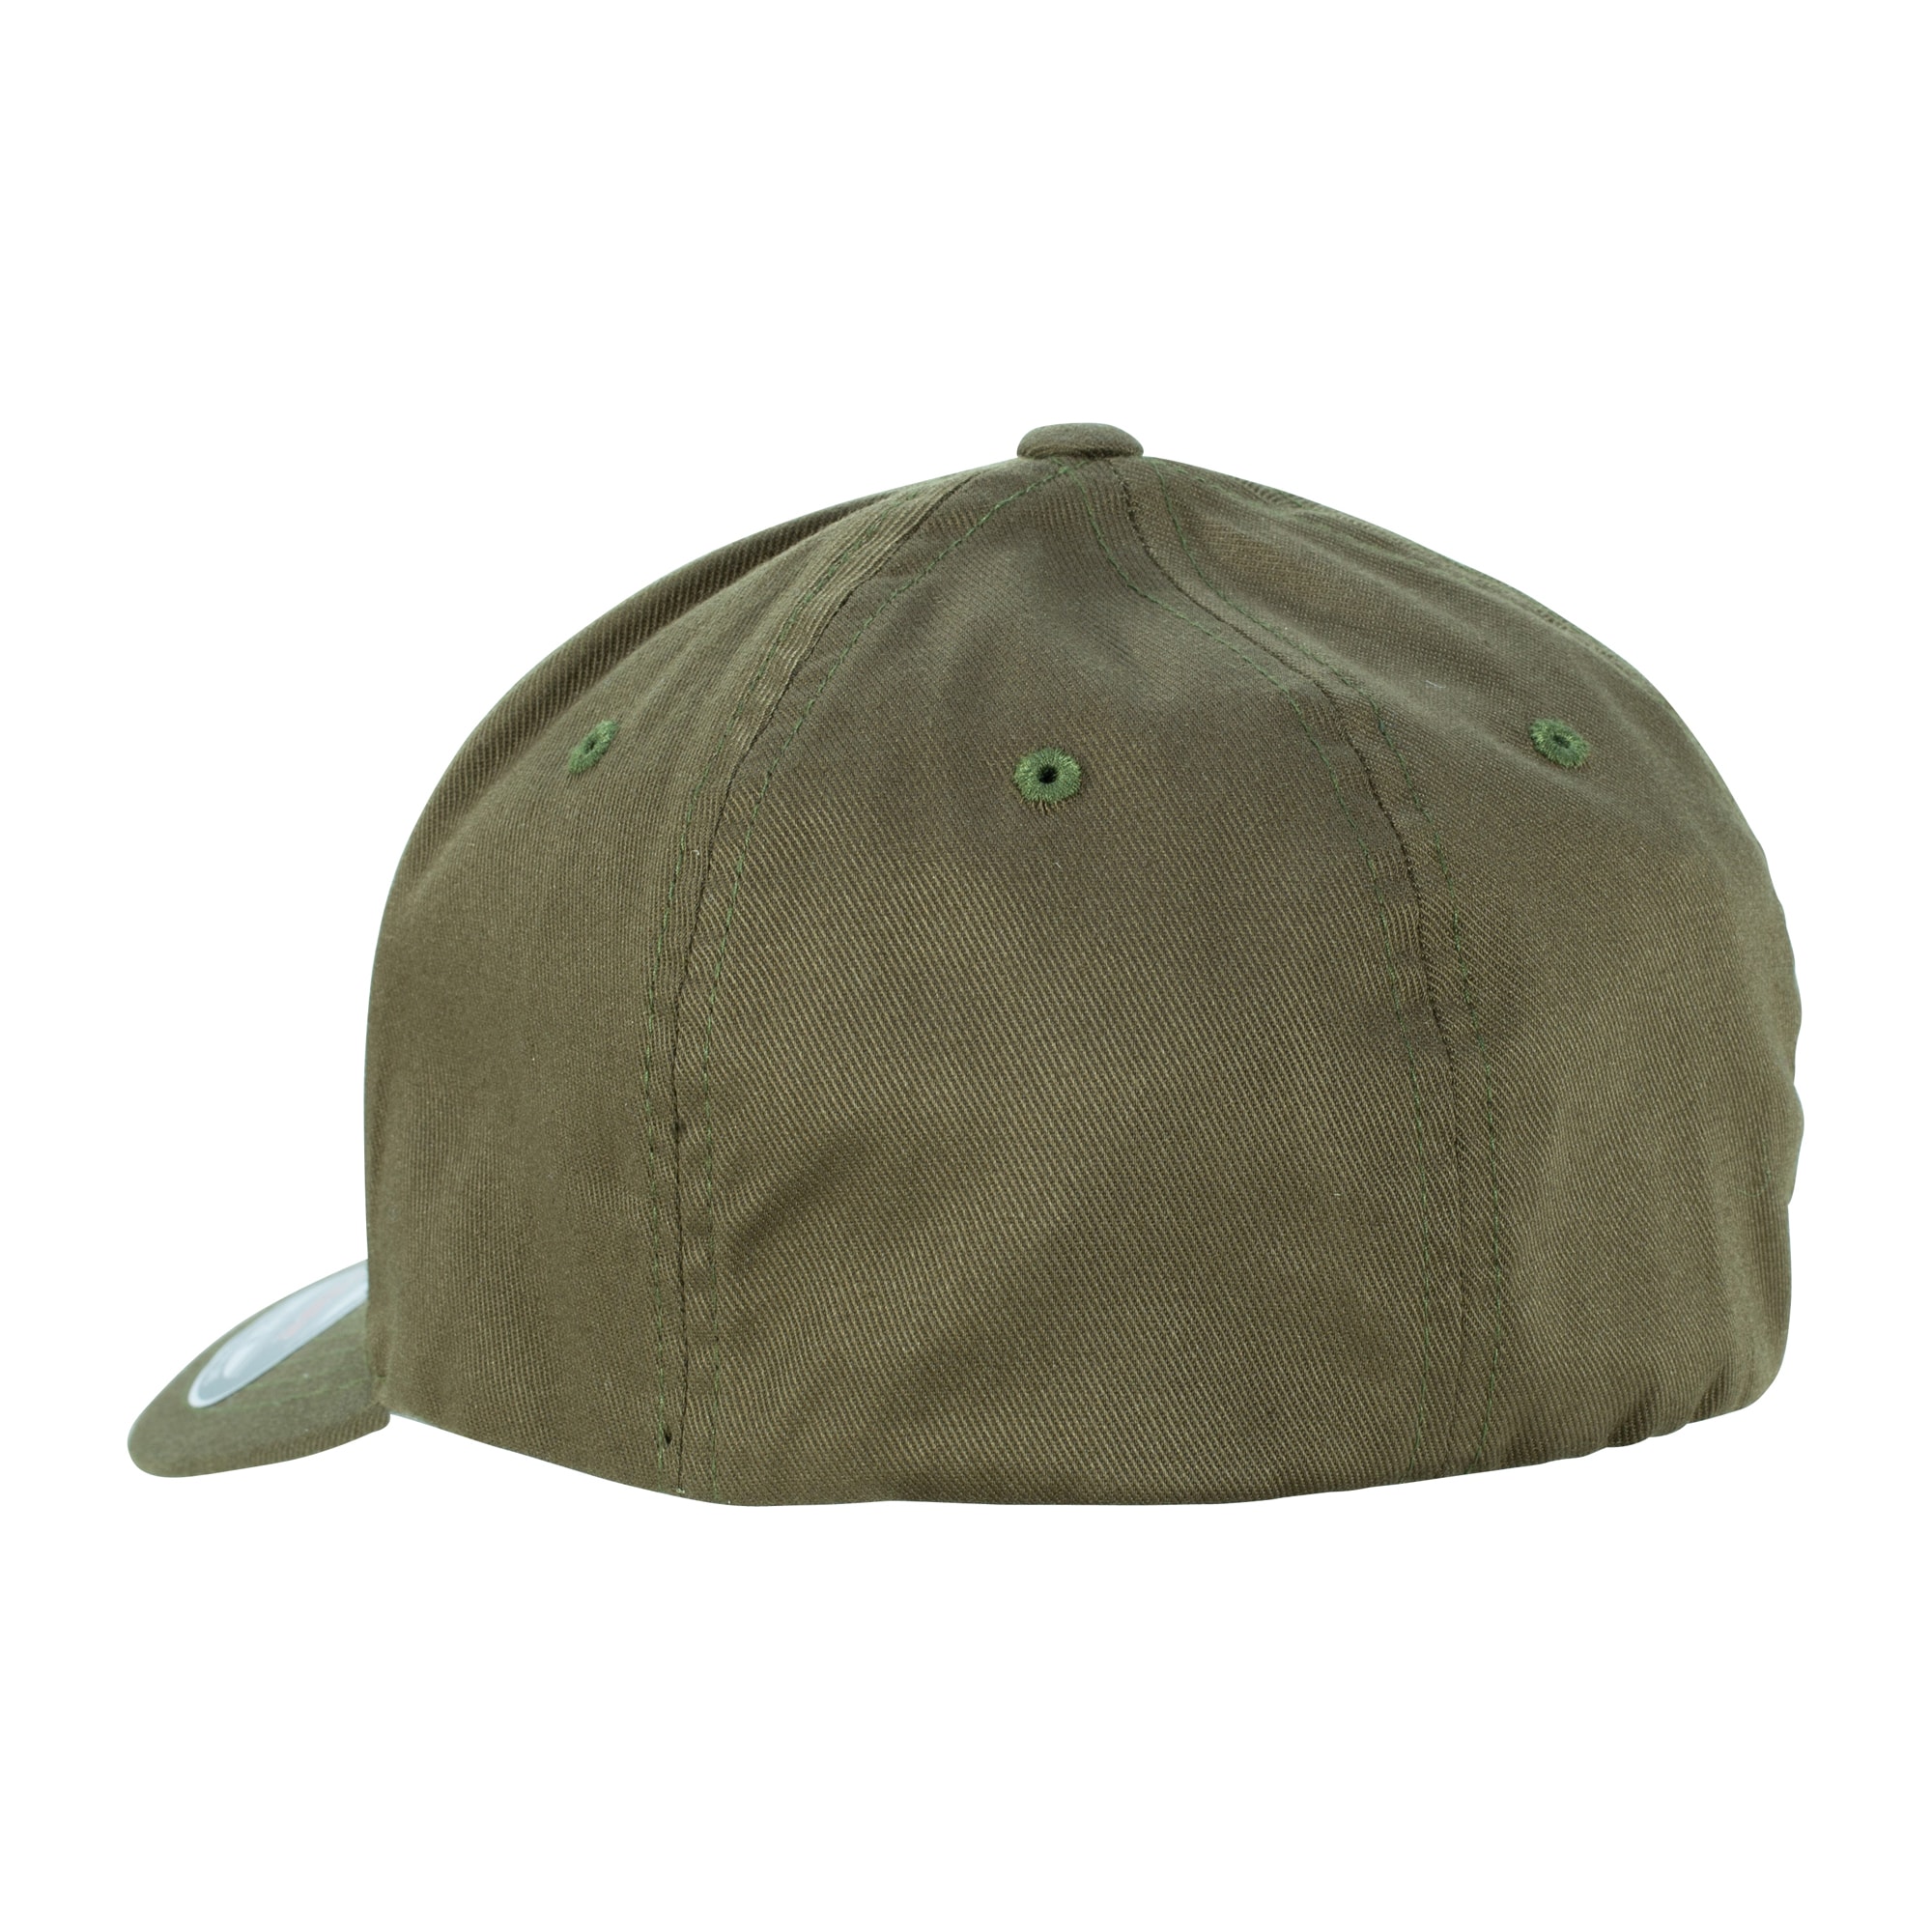 Purchase the Café Viereck Cap Punisher black olive by ASMC